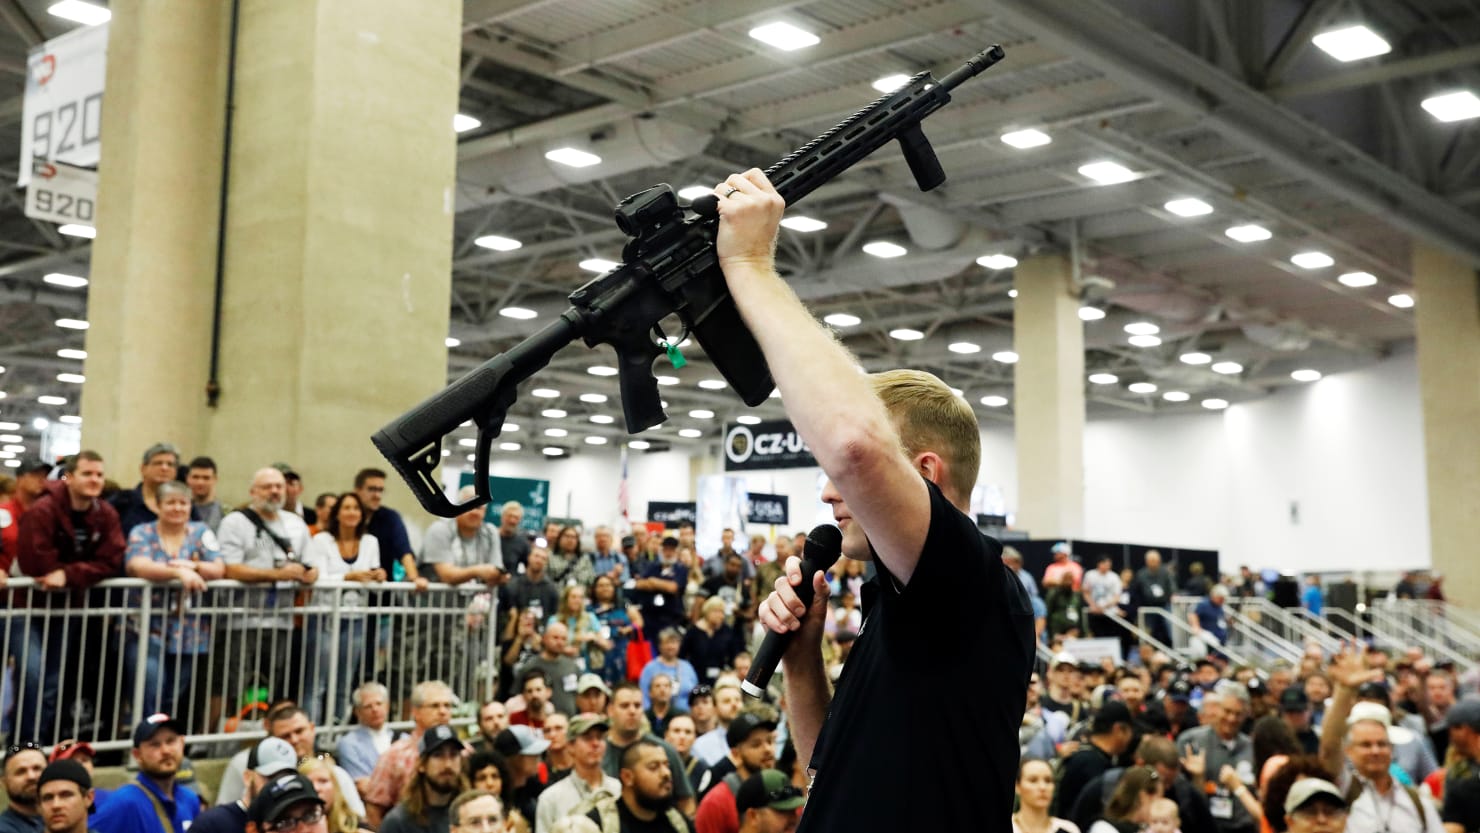 Daniel Defense—the Maker of the Uvalde Shooter’s ‘Perfect Rifle’—Abruptly Exits the NRA Convention – The Daily Beast